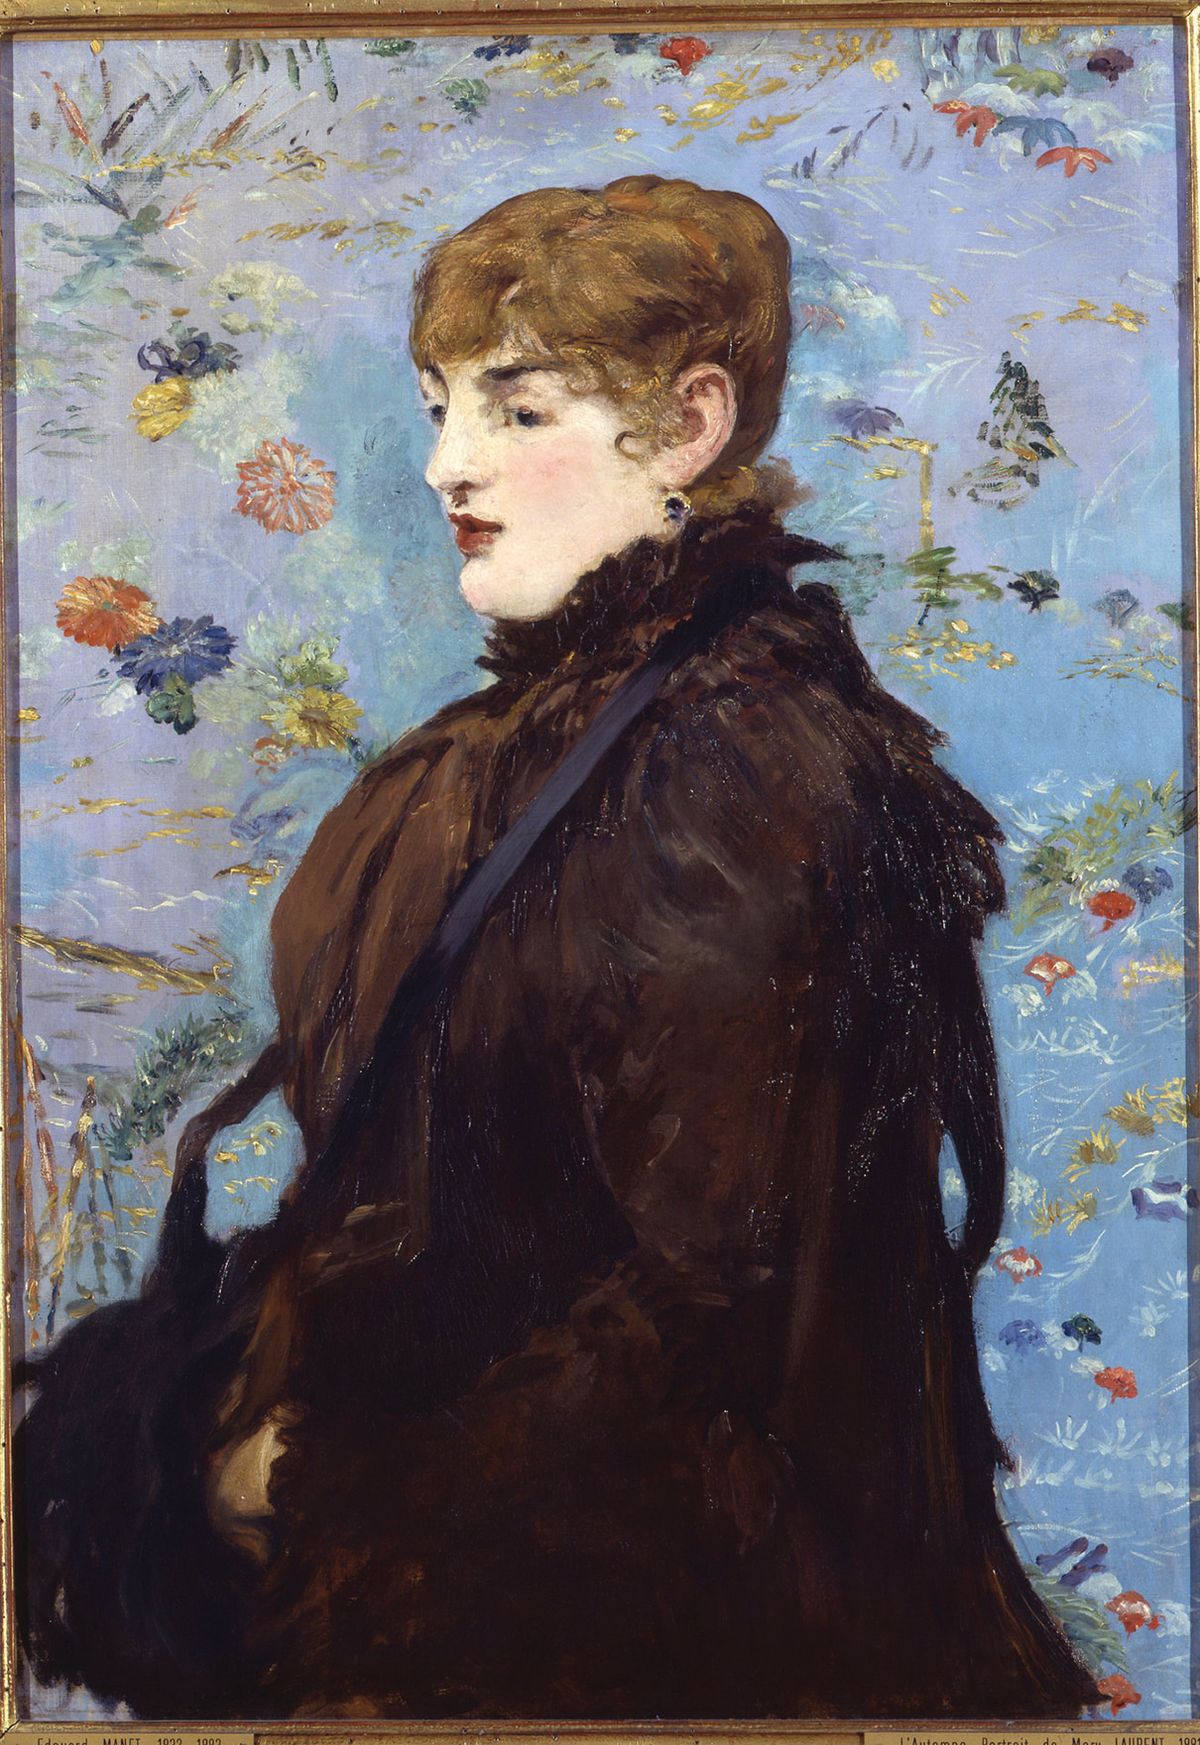 Manet’s, L’Automne ou Portrait de Méry Laurent (1882), in which the subject is subsumed in a background full of colour and texture © RMN-Grand Palais; Courtesy of the Musée des Beaux-Arts